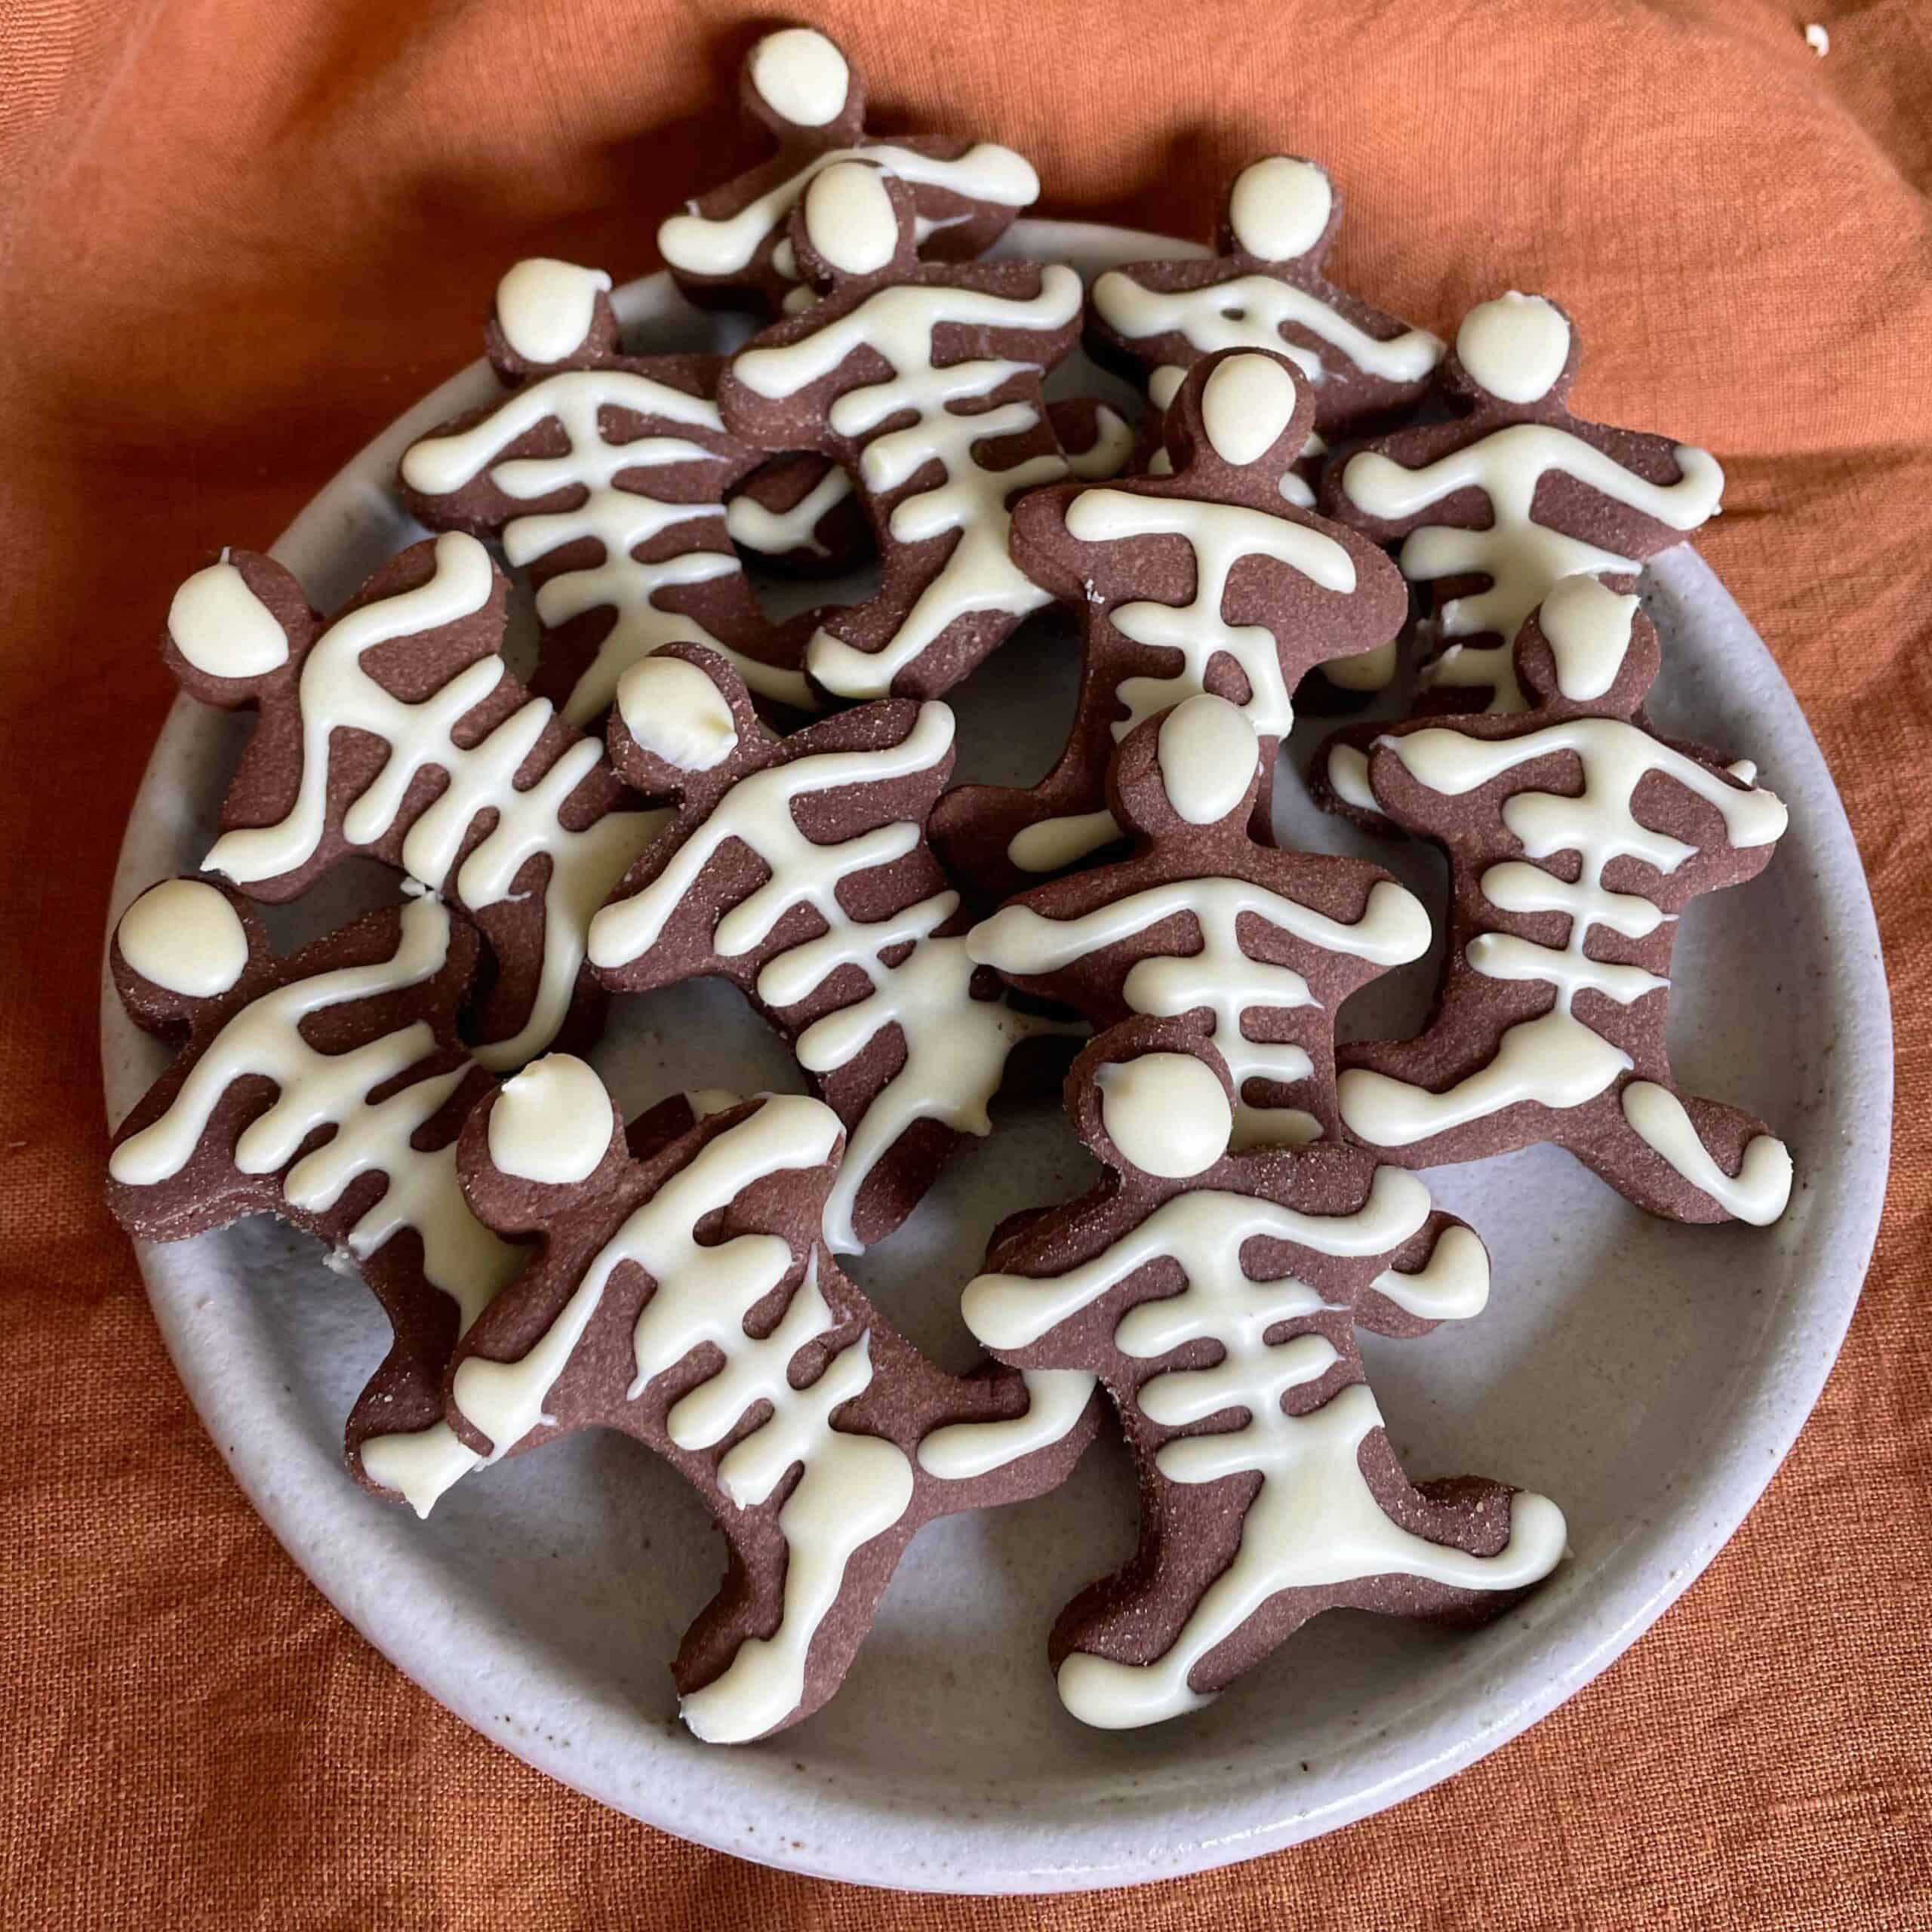 Small Skeleton Cookies on a small white plate on an orange tablecloth.